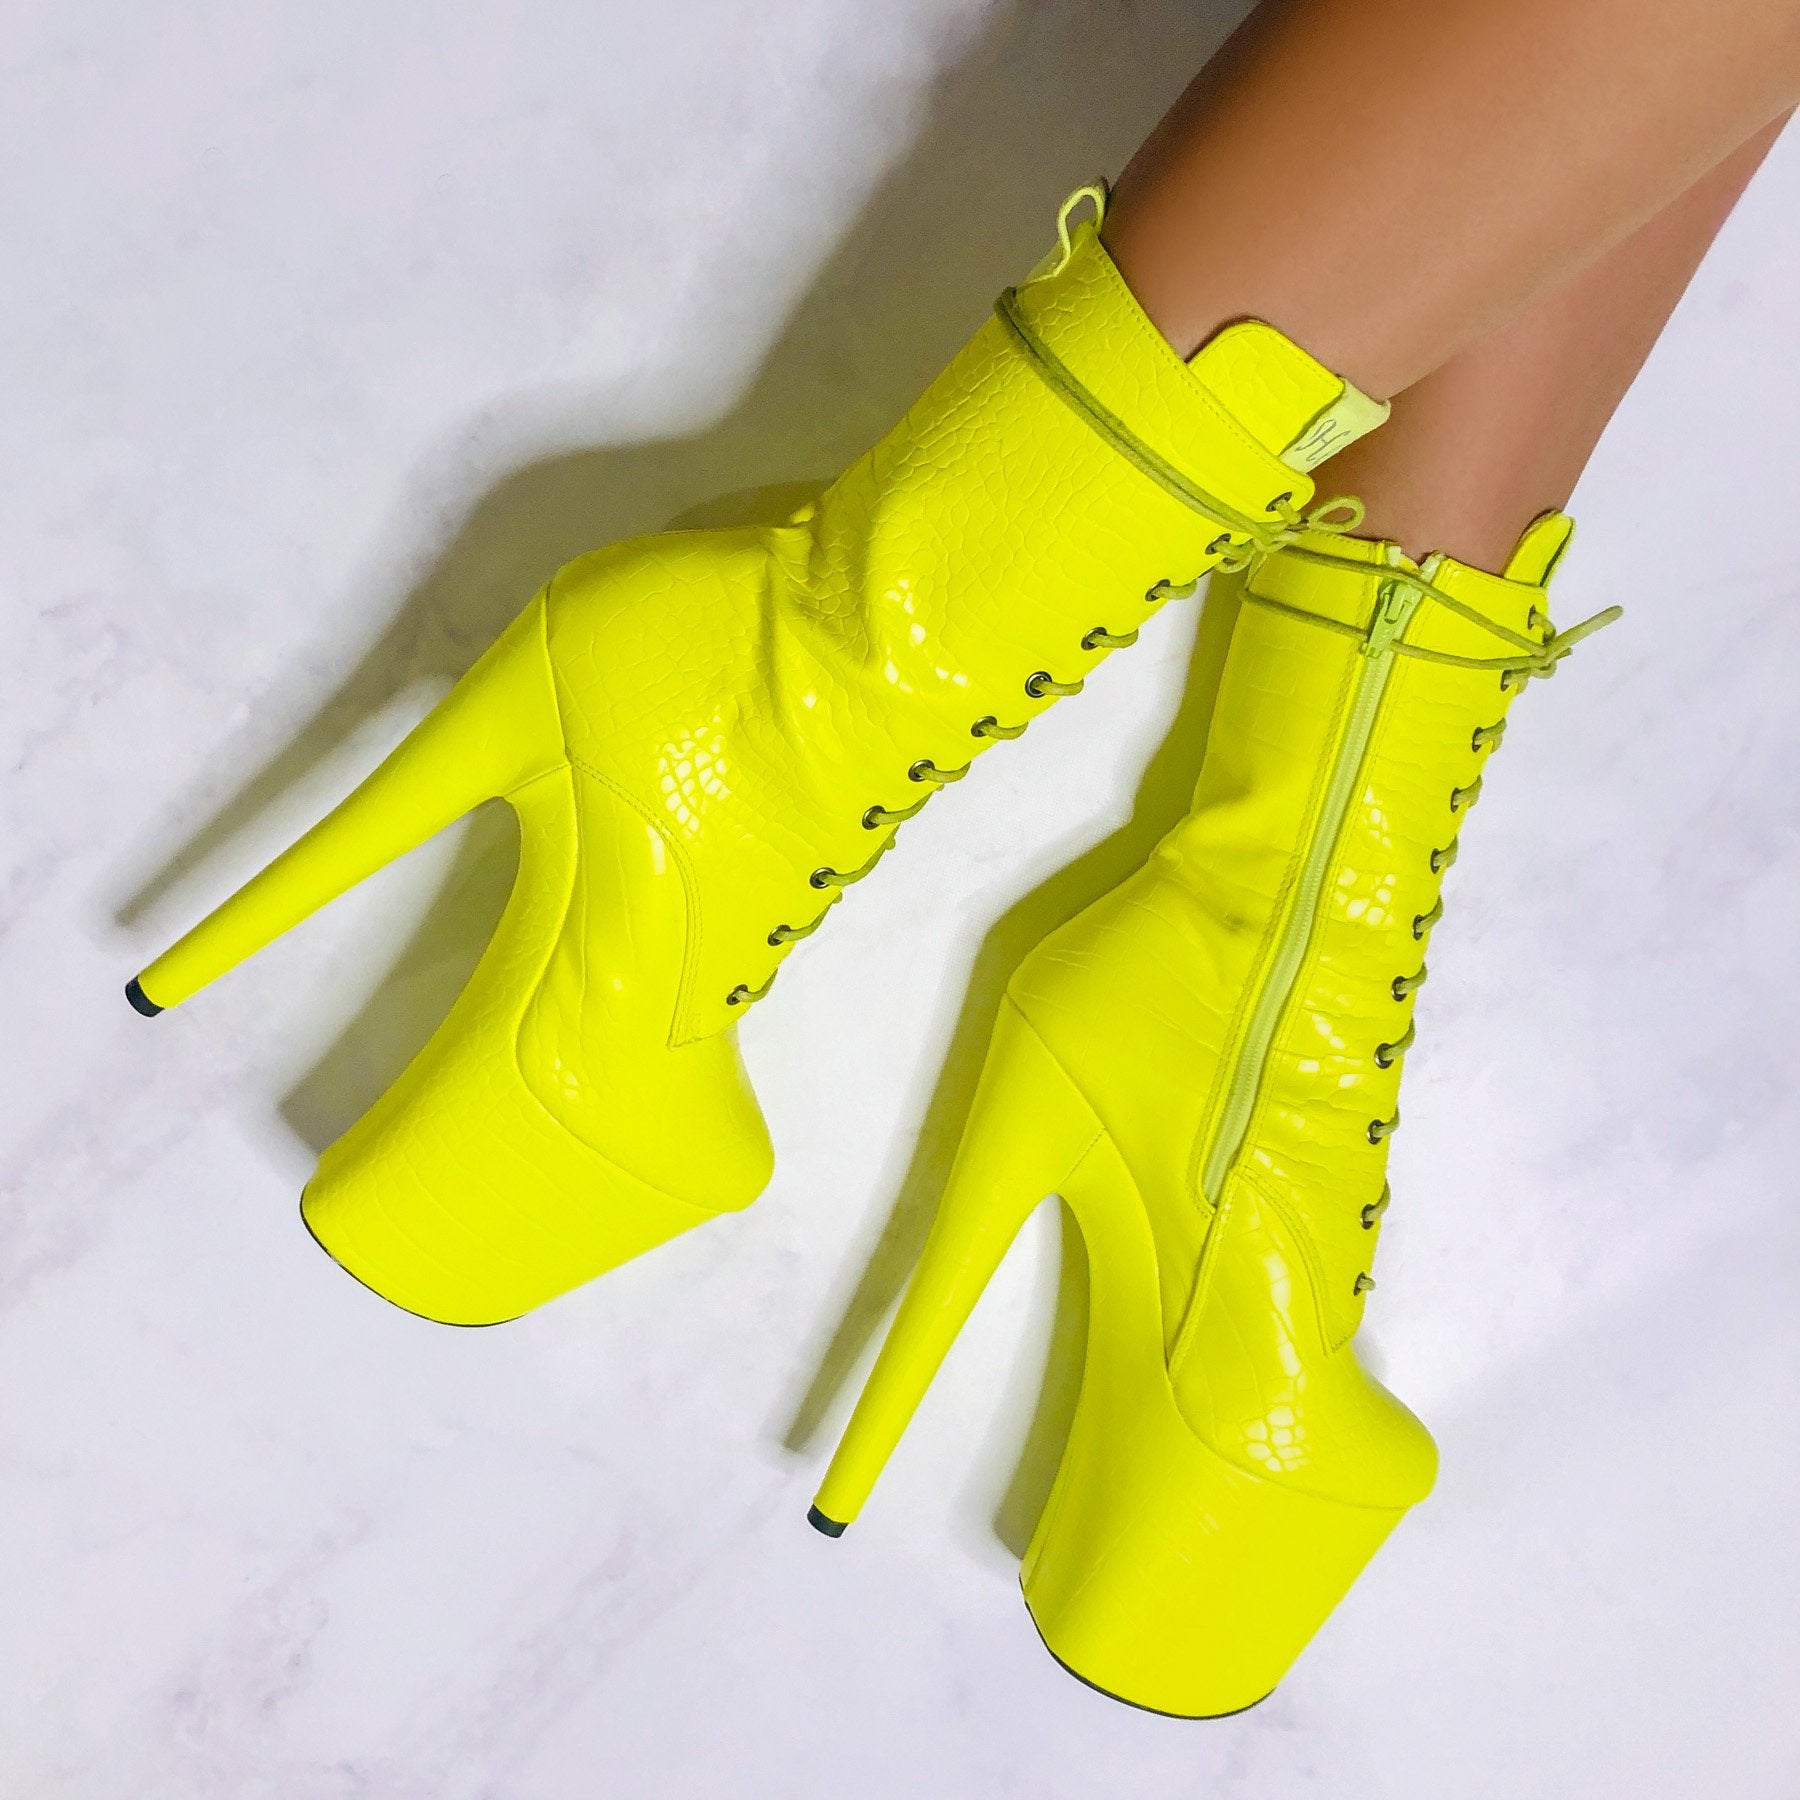 Sequined heeled ankle boots - Neon yellow - Ladies | H&M IN